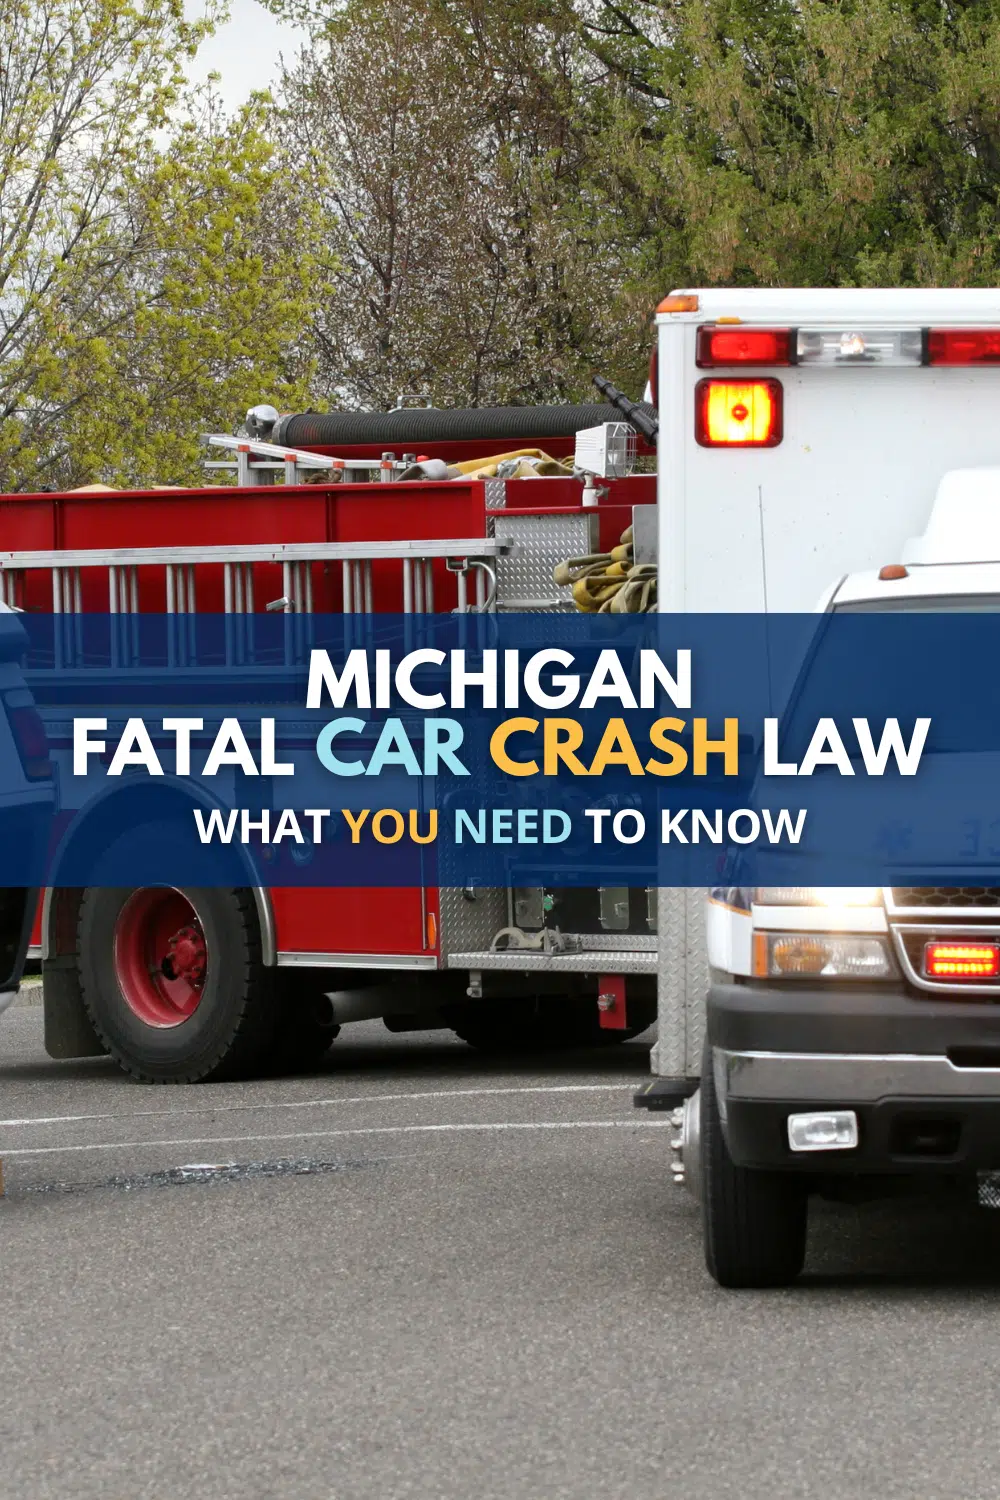 Michigan Fatal Car Crash Law: What You Need To Know